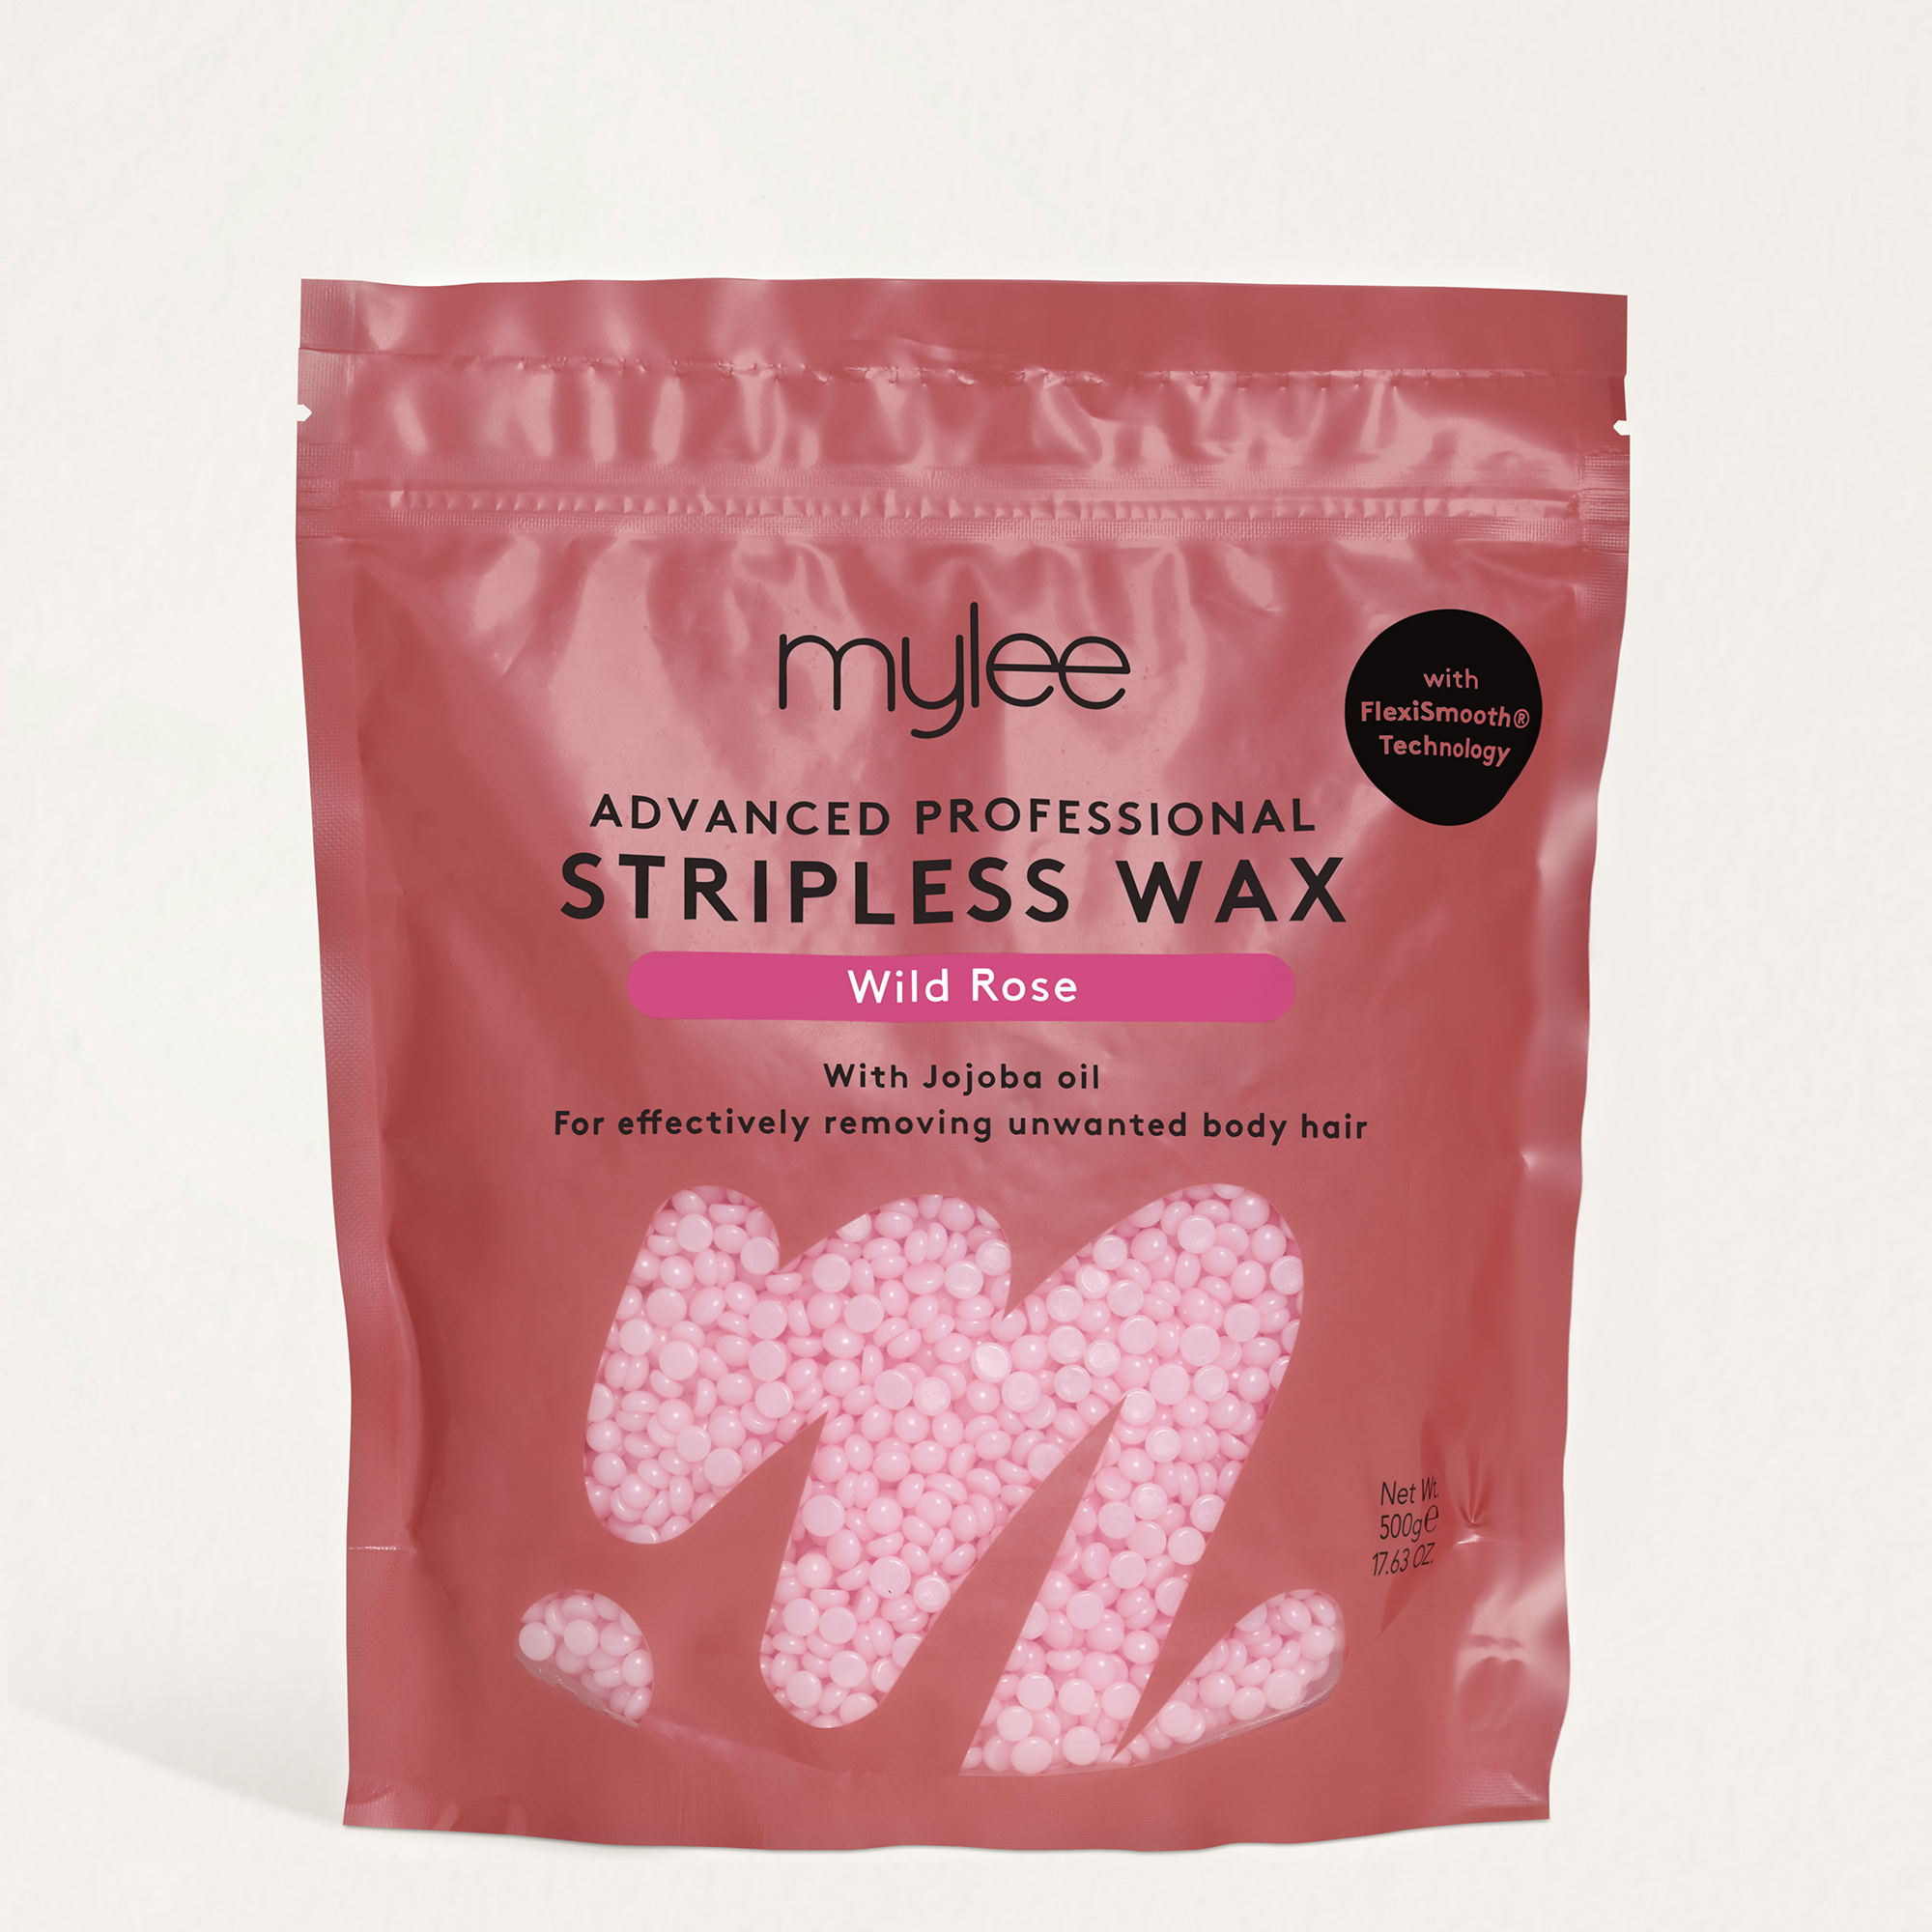 Image of Mylee Advanced Professional Stripless Wax with Flexismooth Technology - Wild Rose